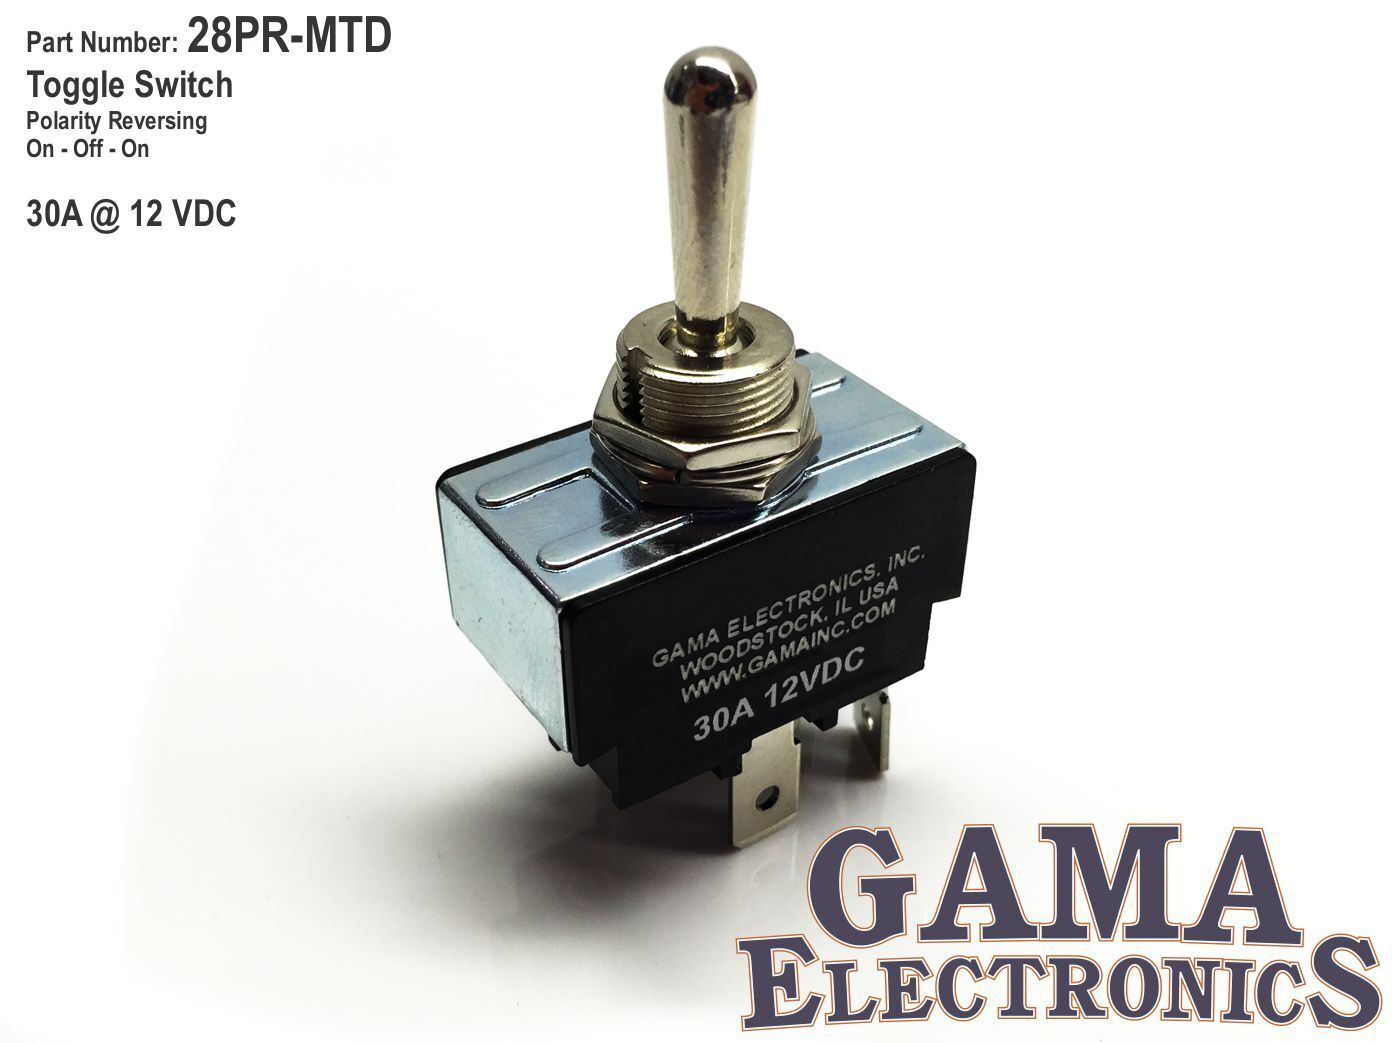 30 Amp Toggle Switch Polarity Reversing DC Motor Control - Maintained - 28PR-MTD